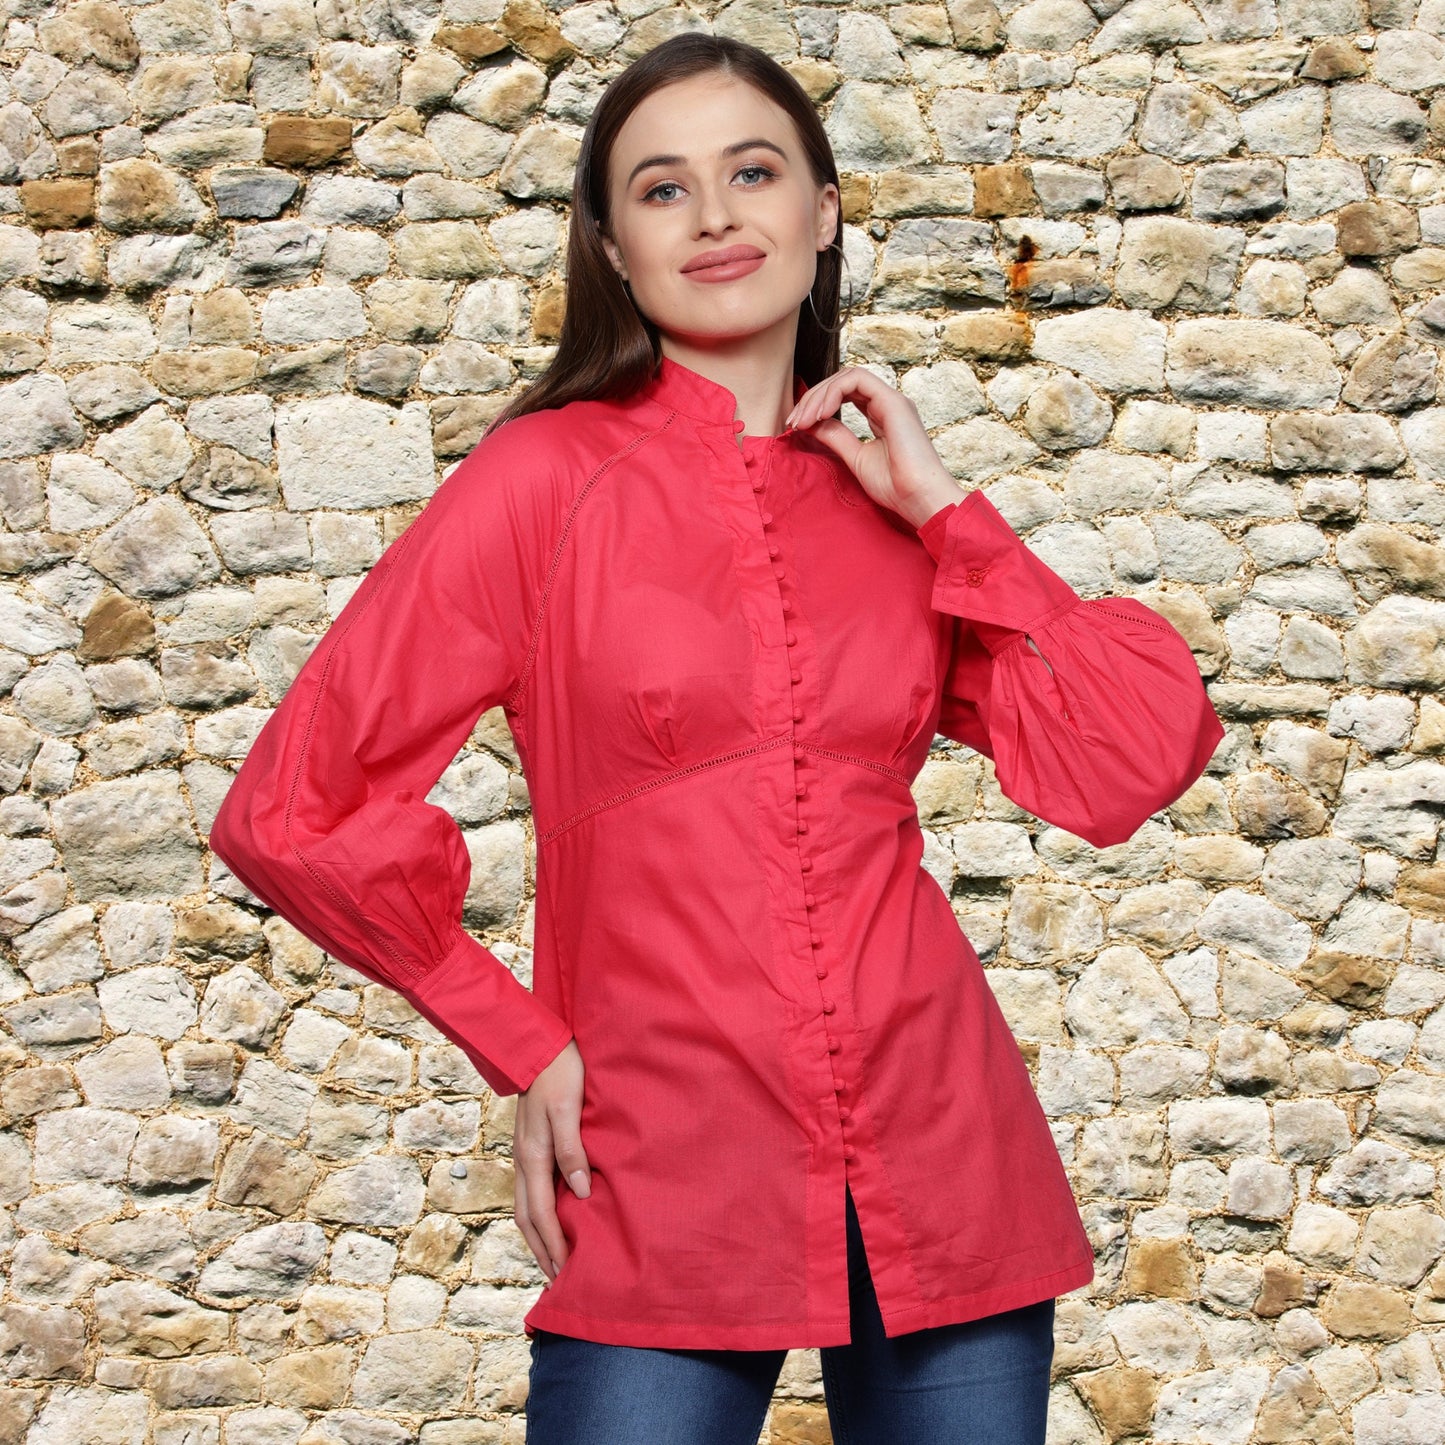 Stylish_cuff_Top  Long_Top  Long_Sleeves_Top  Lace_Top  Hook_and_Eye_Blouse  Fuchsia_Top  Designer_Top  Designer_blouse  Cotton_solid  Boutique_Design  Beautiful_Blouse  Band_collar_Top